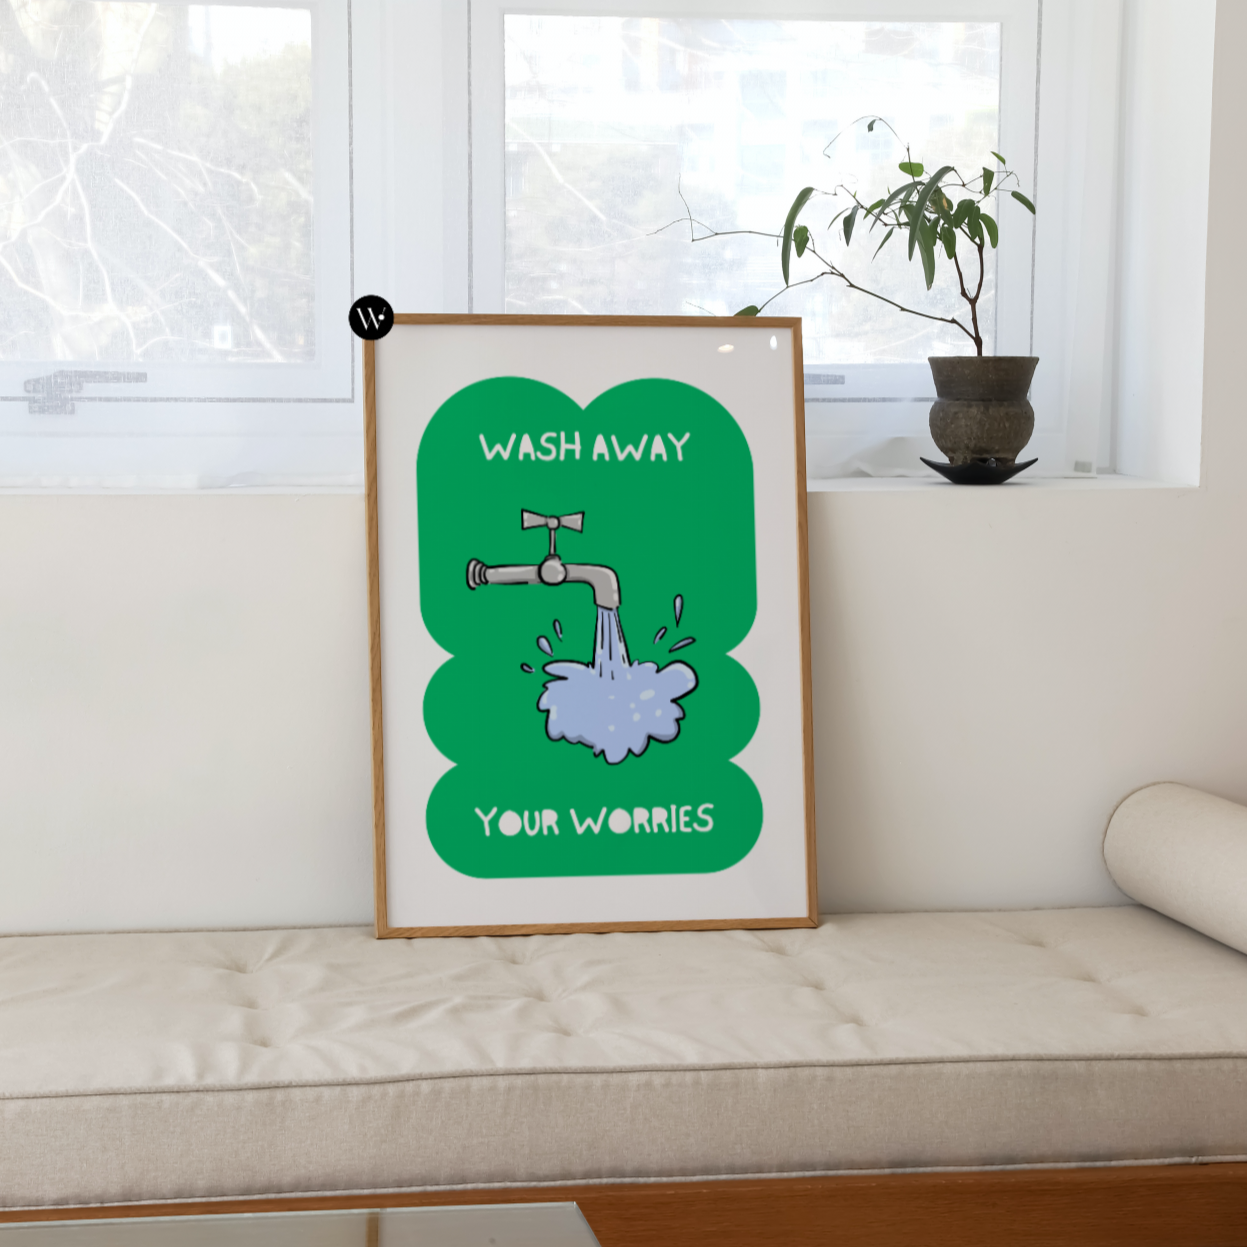 Wash Away Your Worries Poster Print